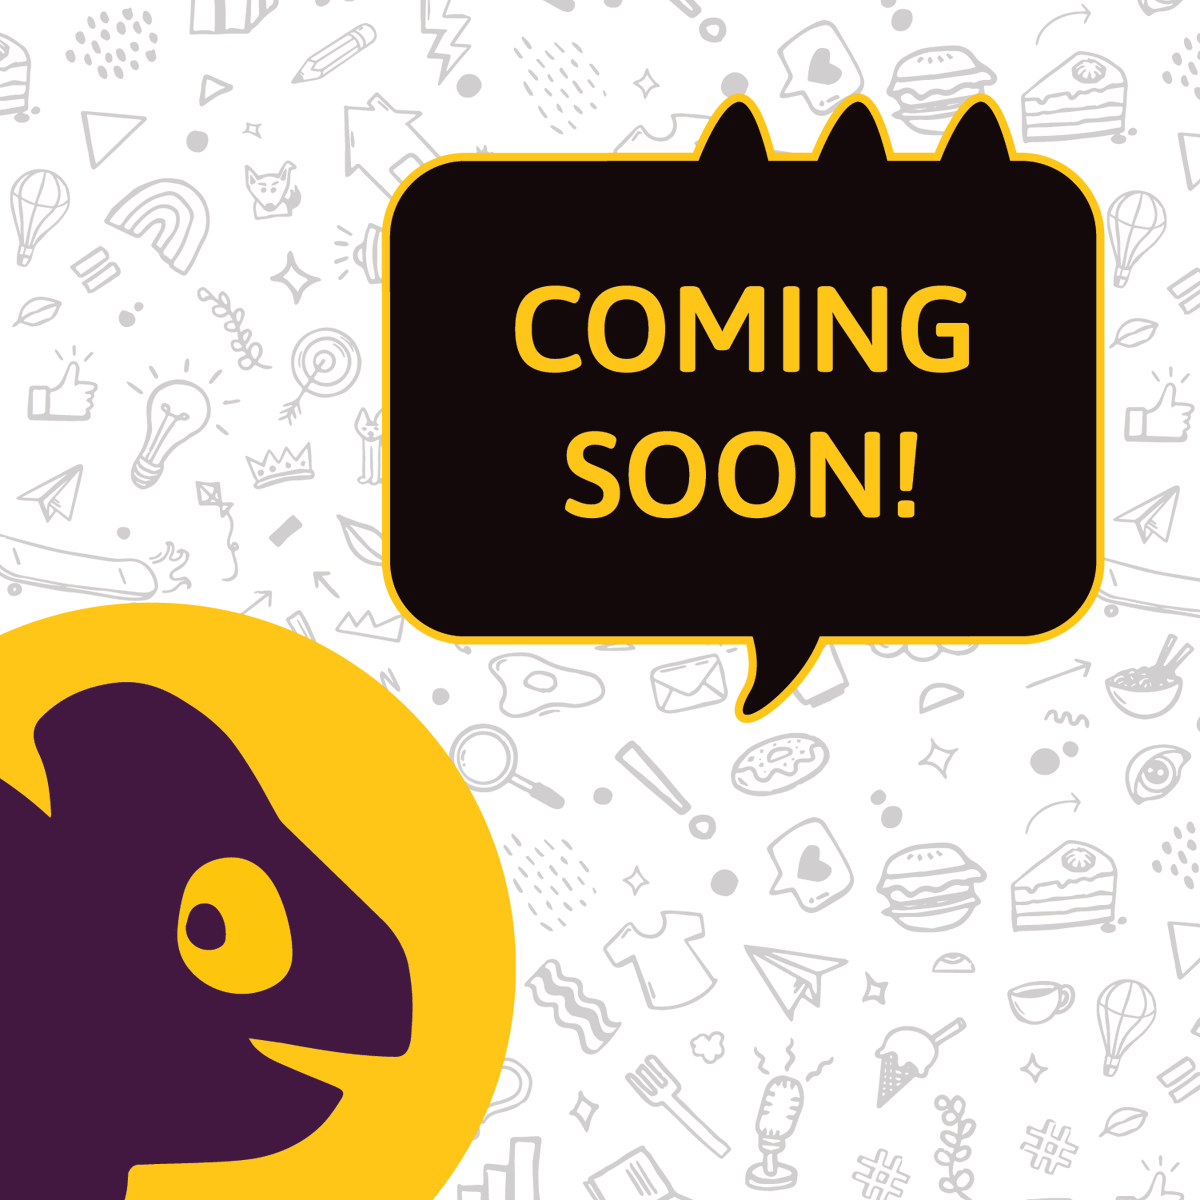 Our dream is finally taking shape, and we are super excited to share this news with you.

We are coming sooooooon...

P.S. DM us your email ID and grab your coupon code for when we launch!

#huesutra #comingsoon #countdownbegins #newbrandalert